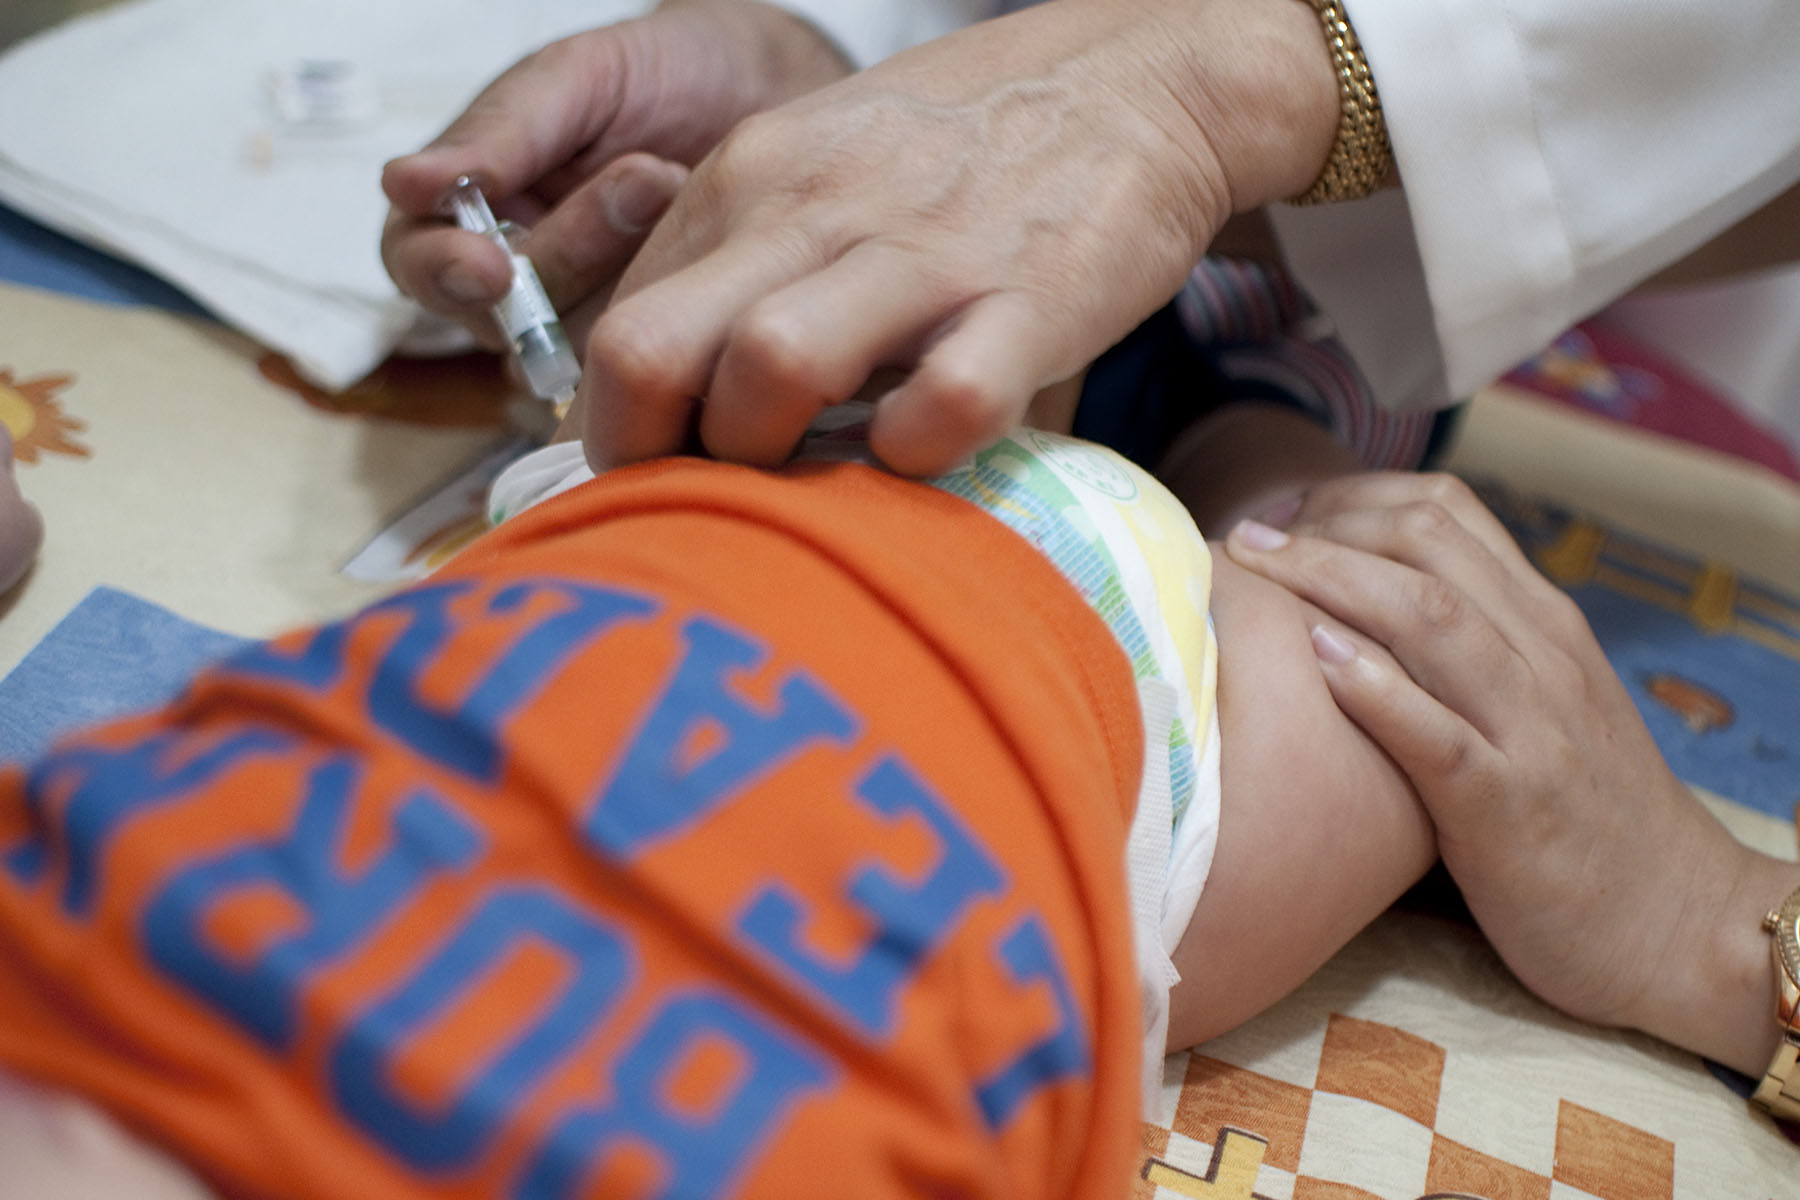 A baby receives a shot into his thigh muscle.